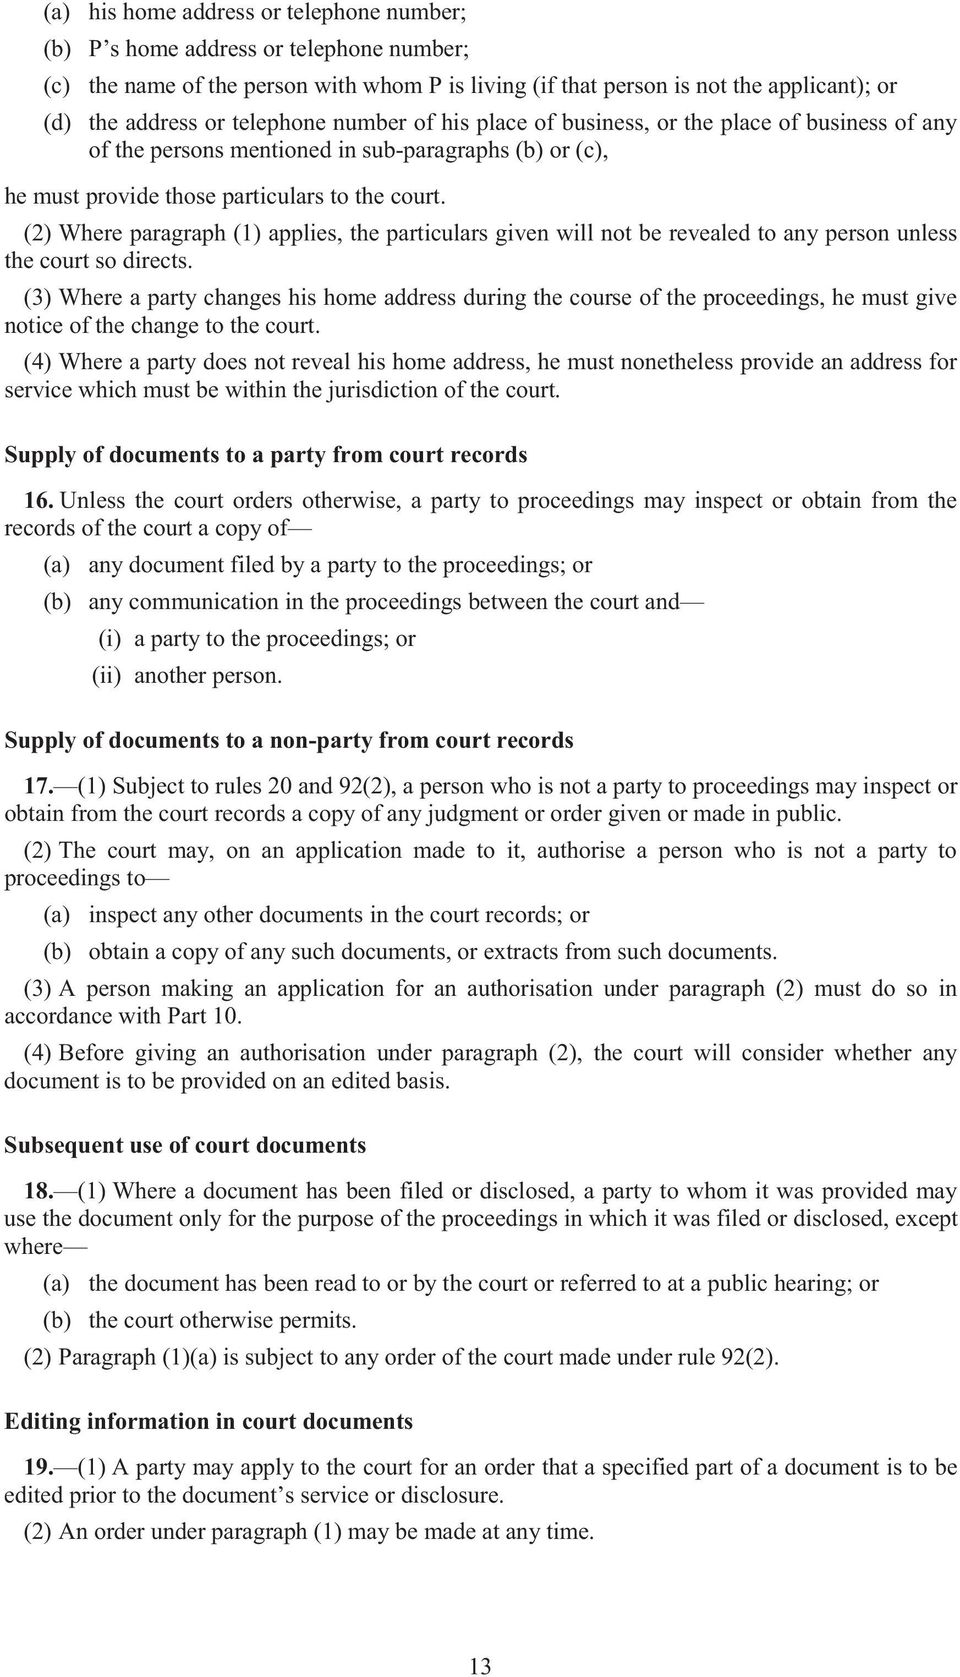 (2) Where paragraph (1) applies, the particulars given will not be revealed to any person unless the court so directs.